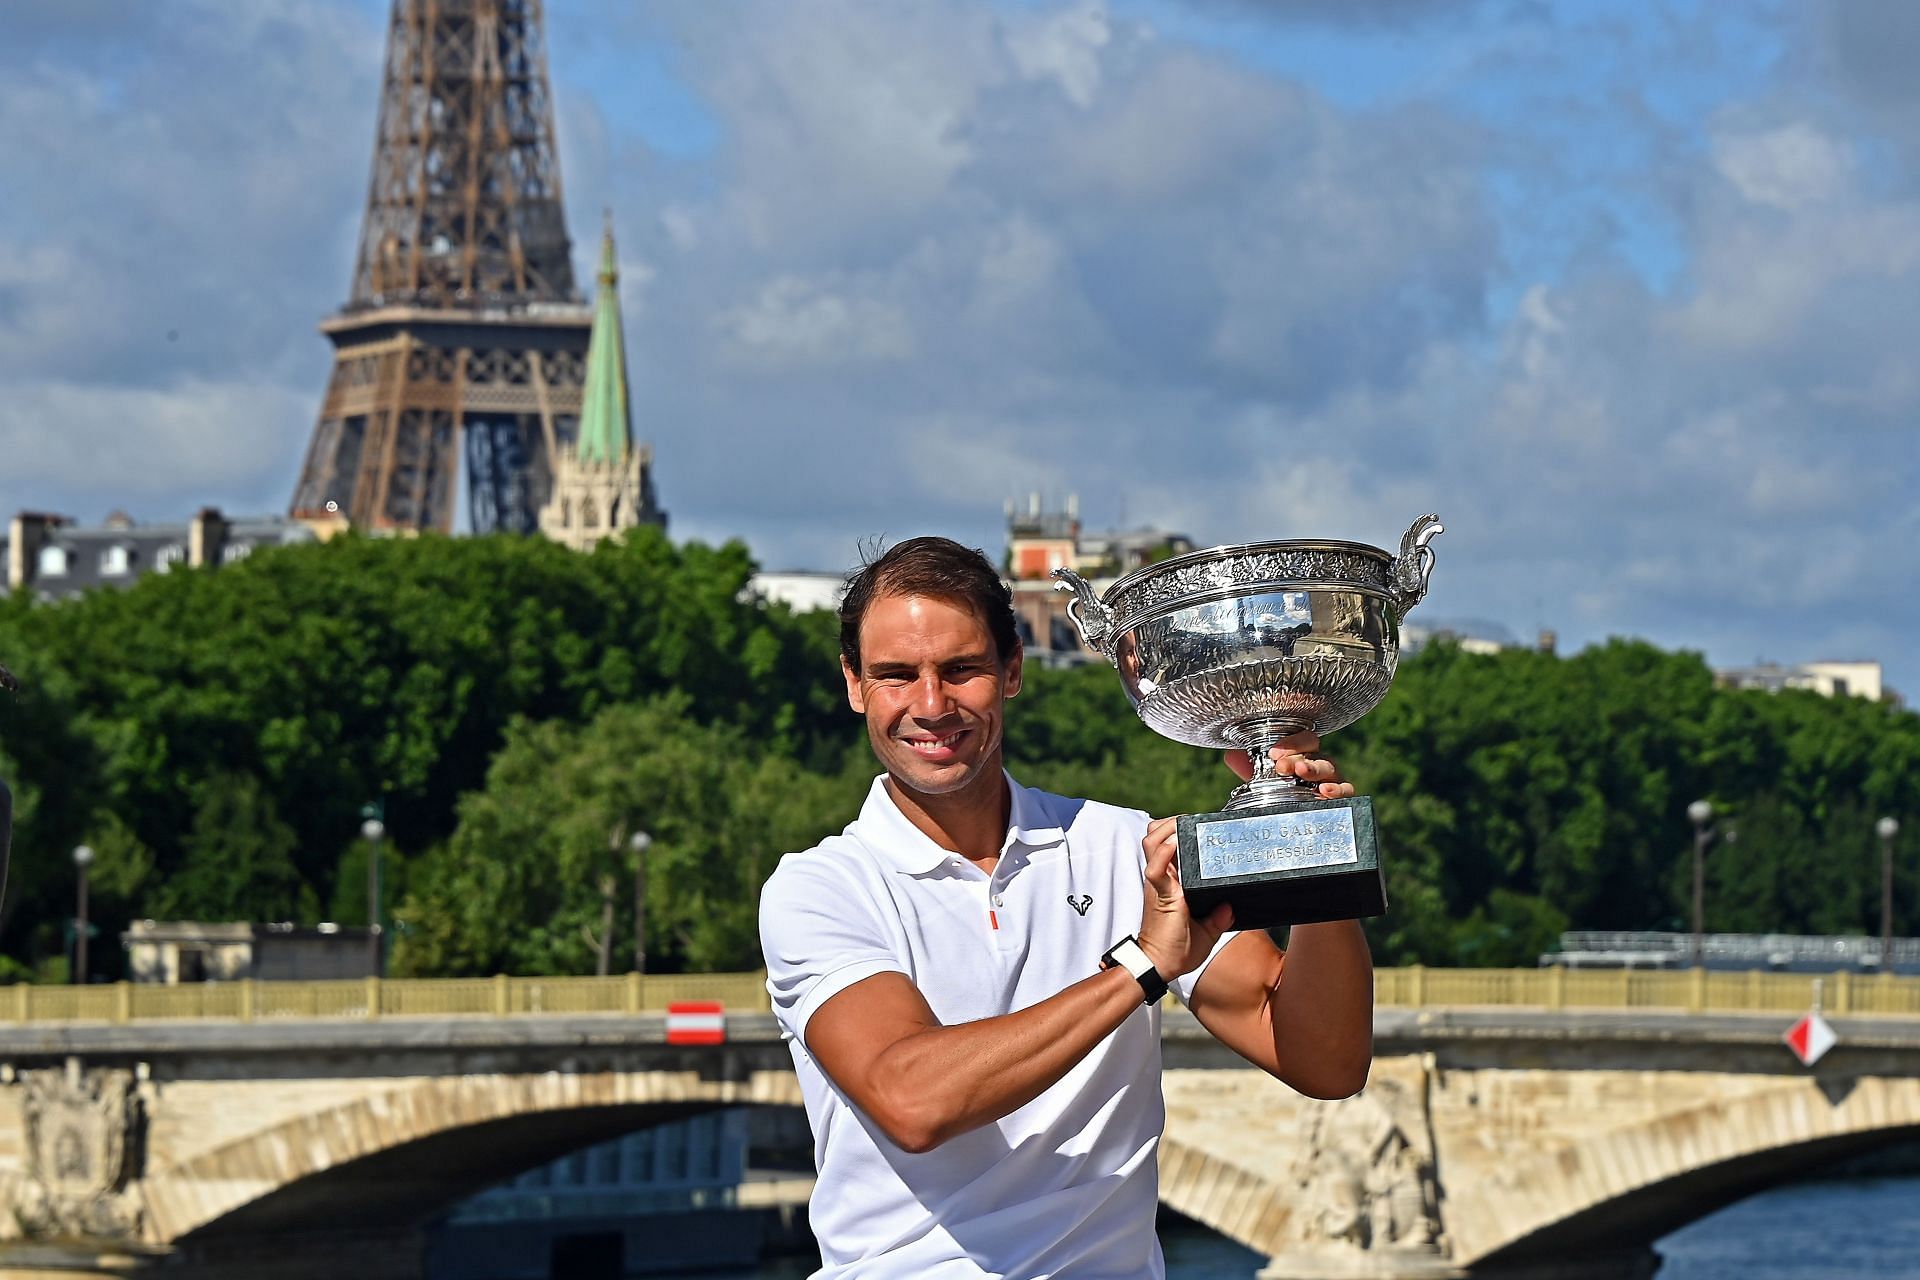 Where to watch French Open 2022 draw ceremony live?